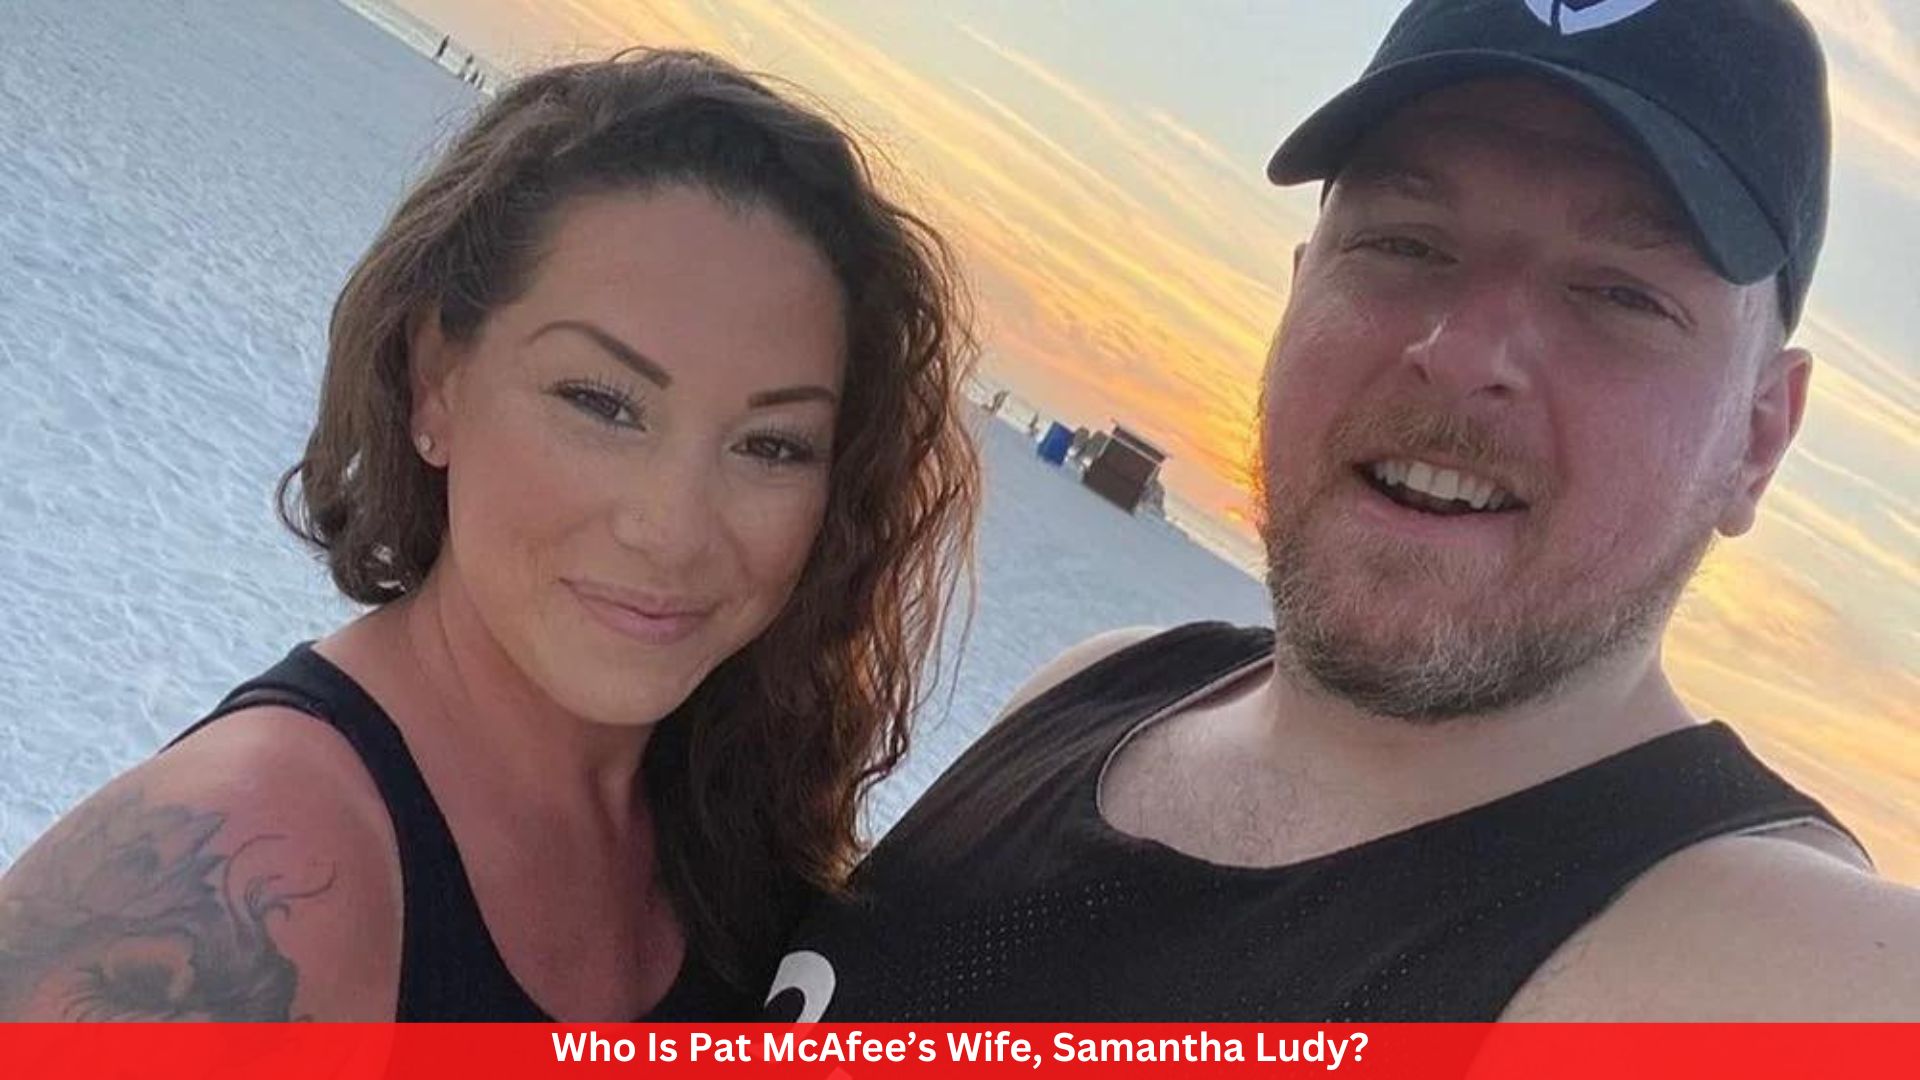 Who Is Pat McAfee’s Wife, Samantha Ludy?